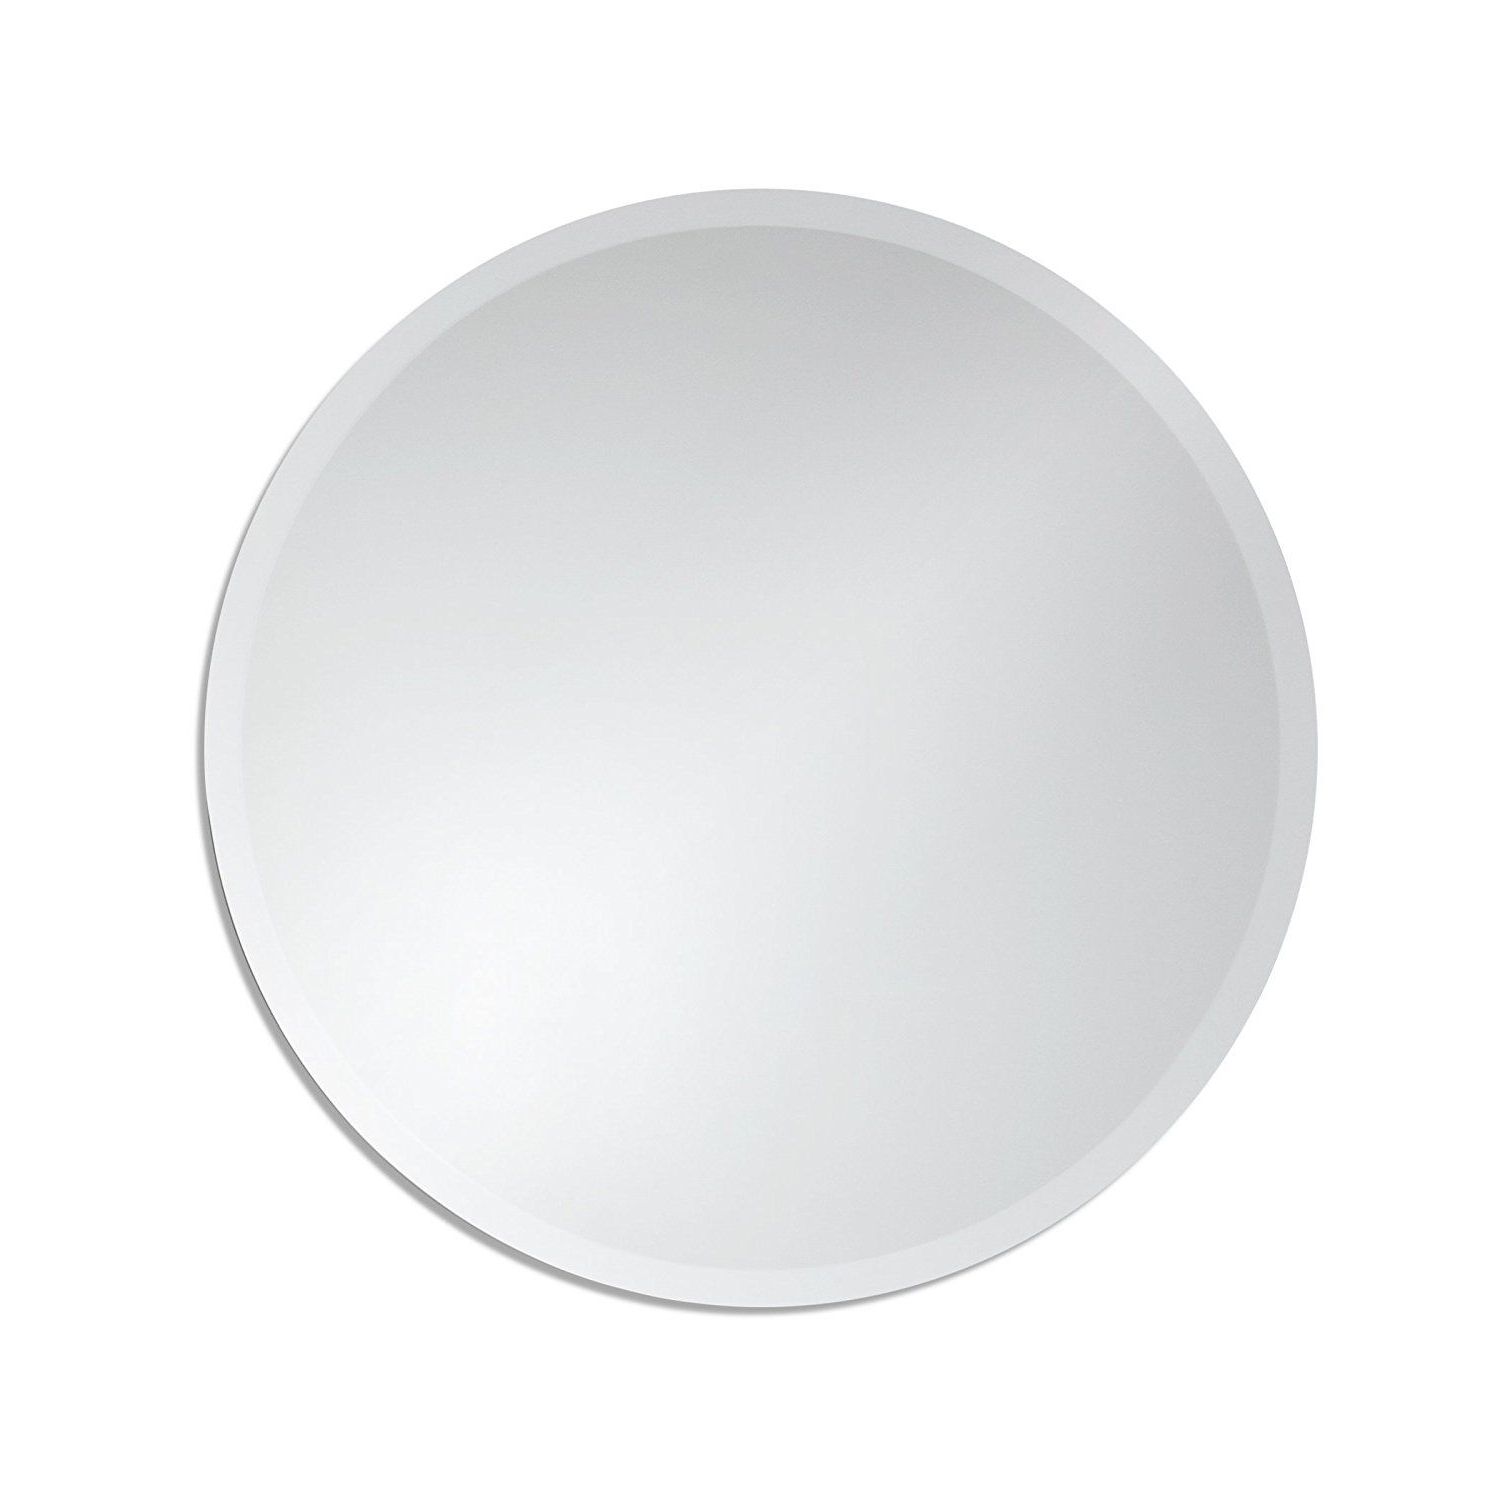 Bathroom, Vanity, Bedroom Within Famous Round Frameless Bathroom Wall Mirrors (View 9 of 15)